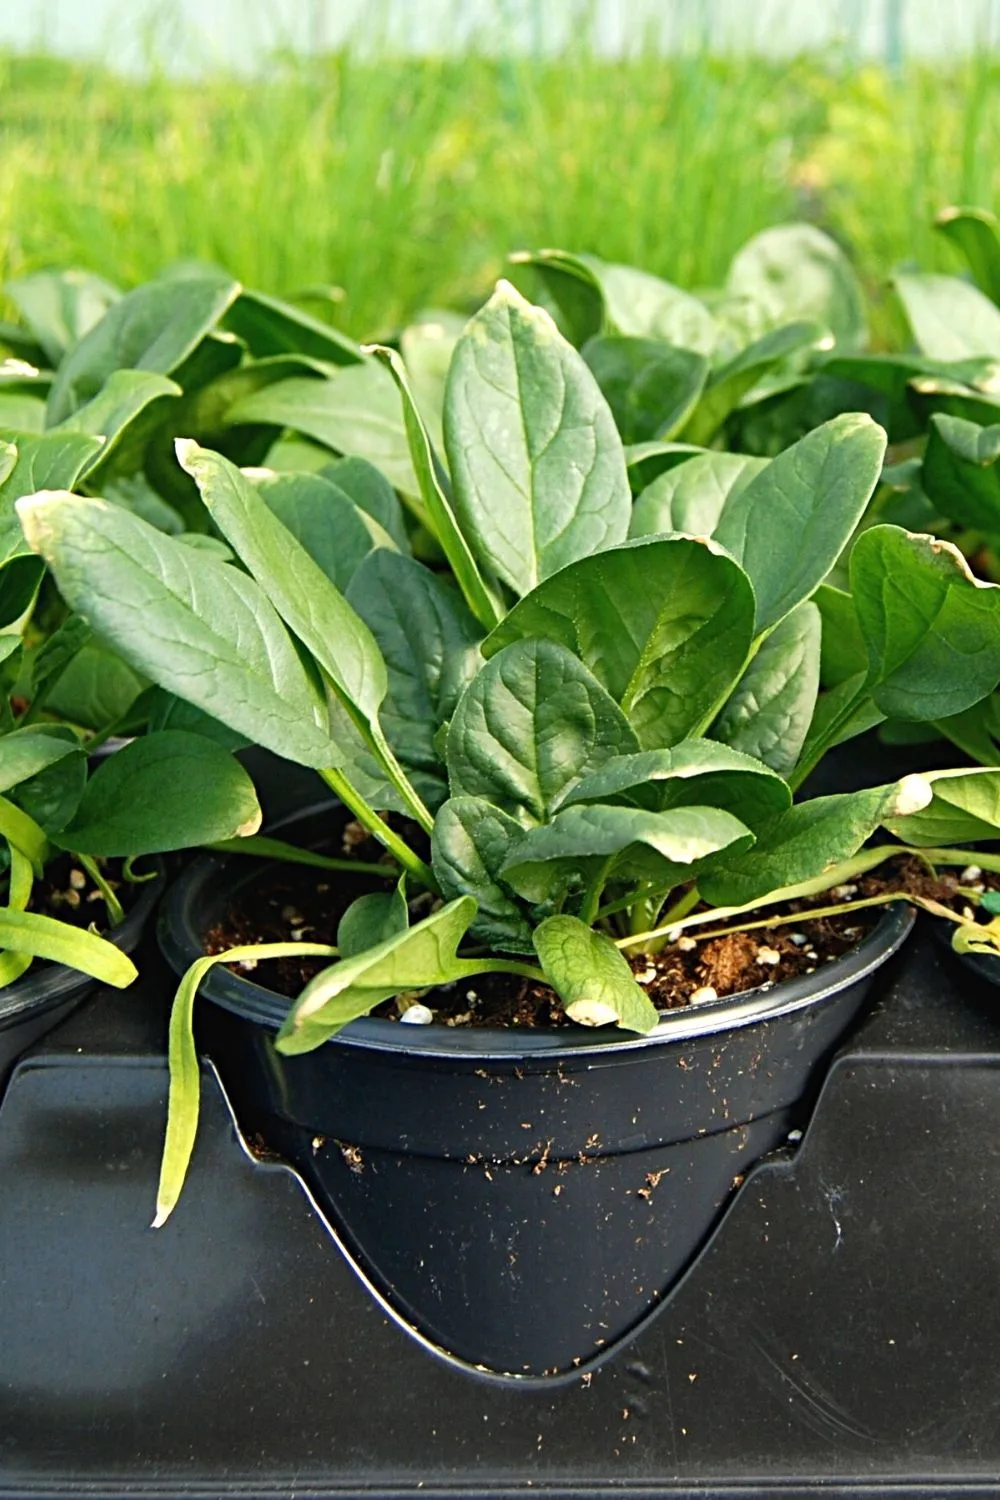 Spinach thrives well in raised beds if you use well-draining and clay-free soil